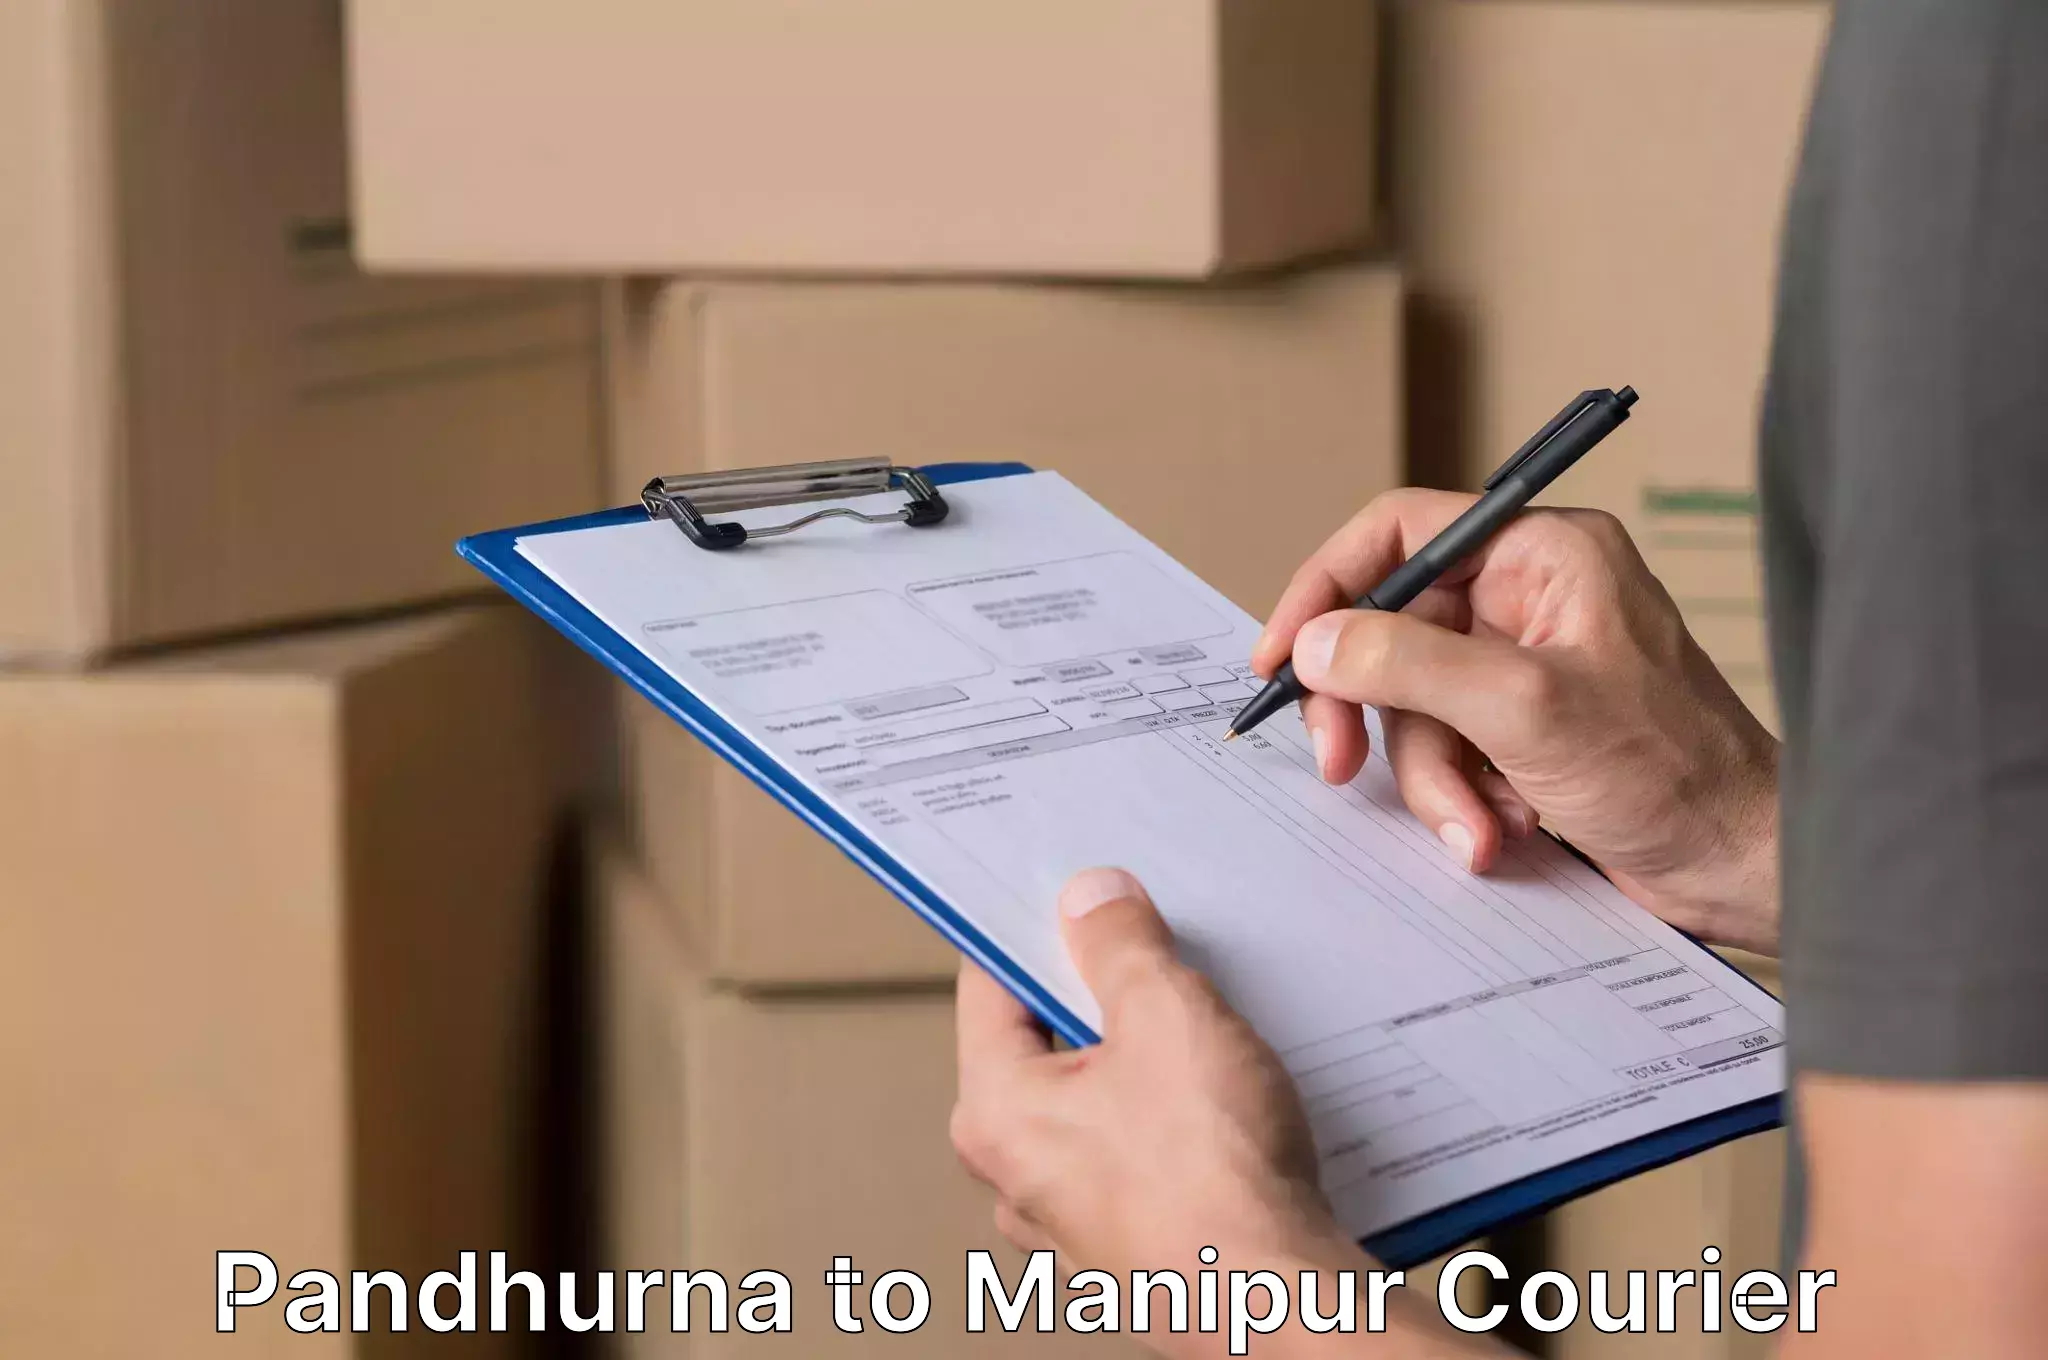 Quality relocation services in Pandhurna to Chandel